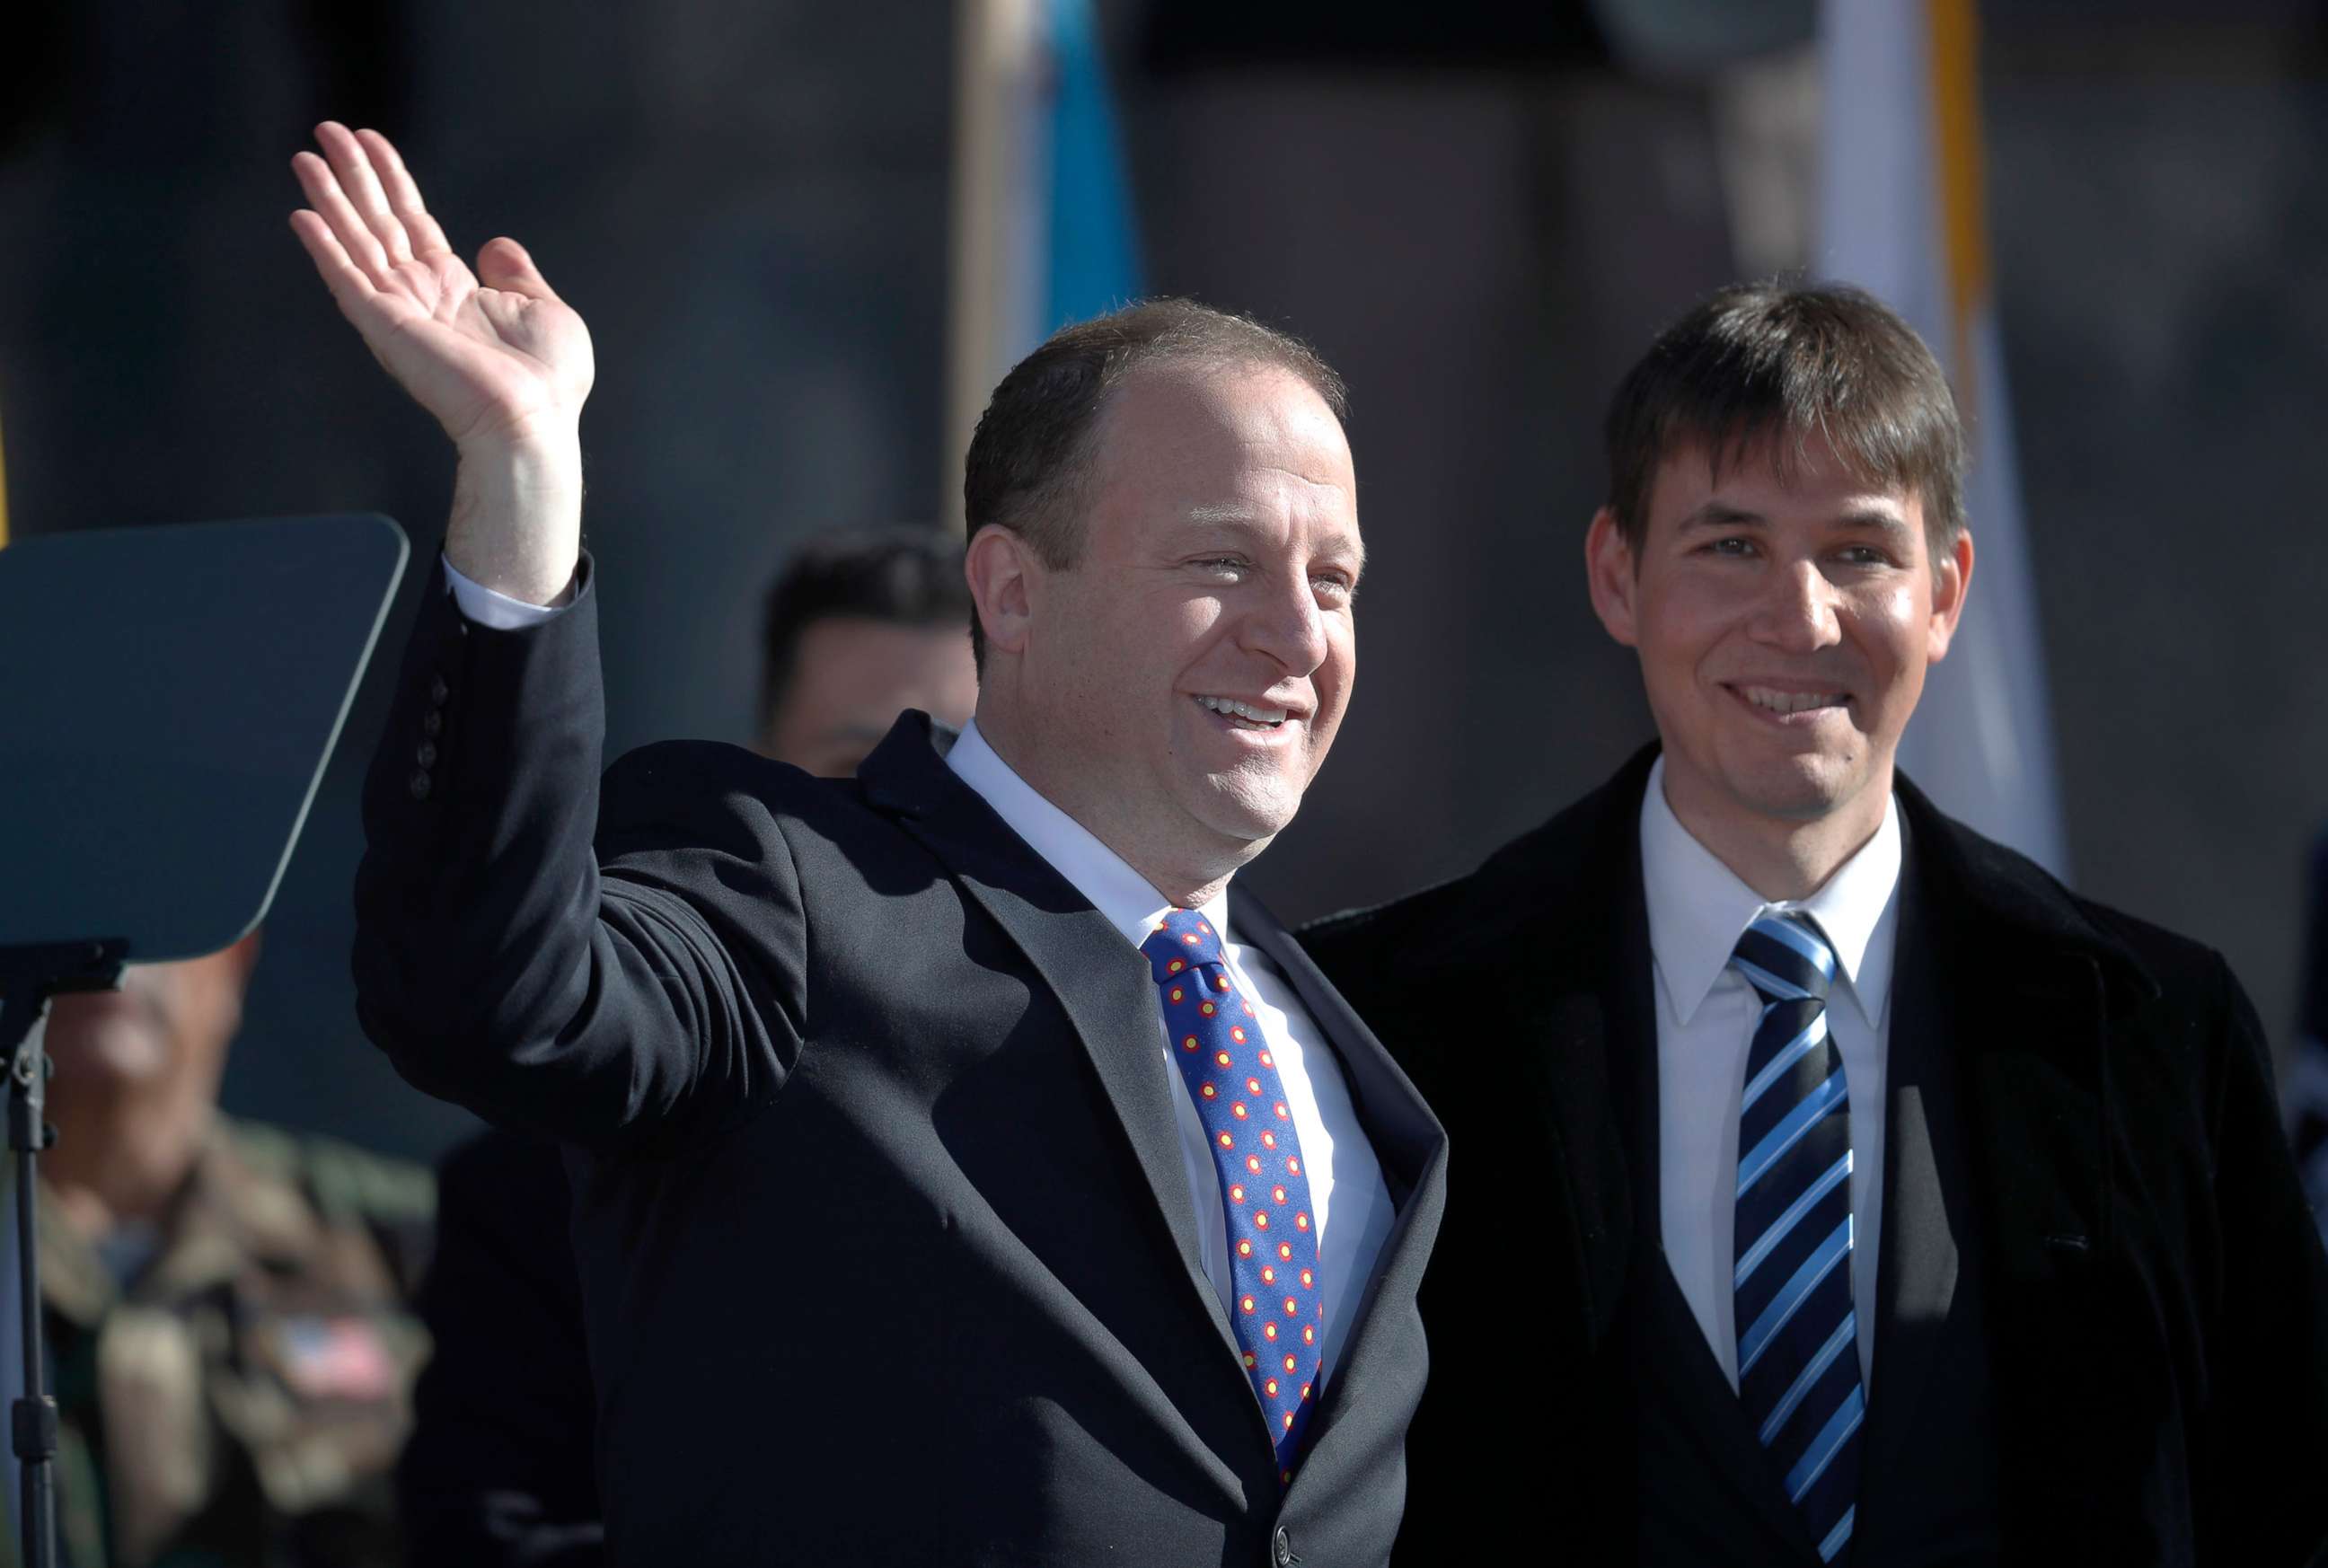 PHOTO: Colorado Gov. Jared Polis, left, joins his partner, Marlon Reis, in acknowledging the crowd after Polis took the oath of office during the inauguration ceremony o Jan. 8, 2019, in Denver.